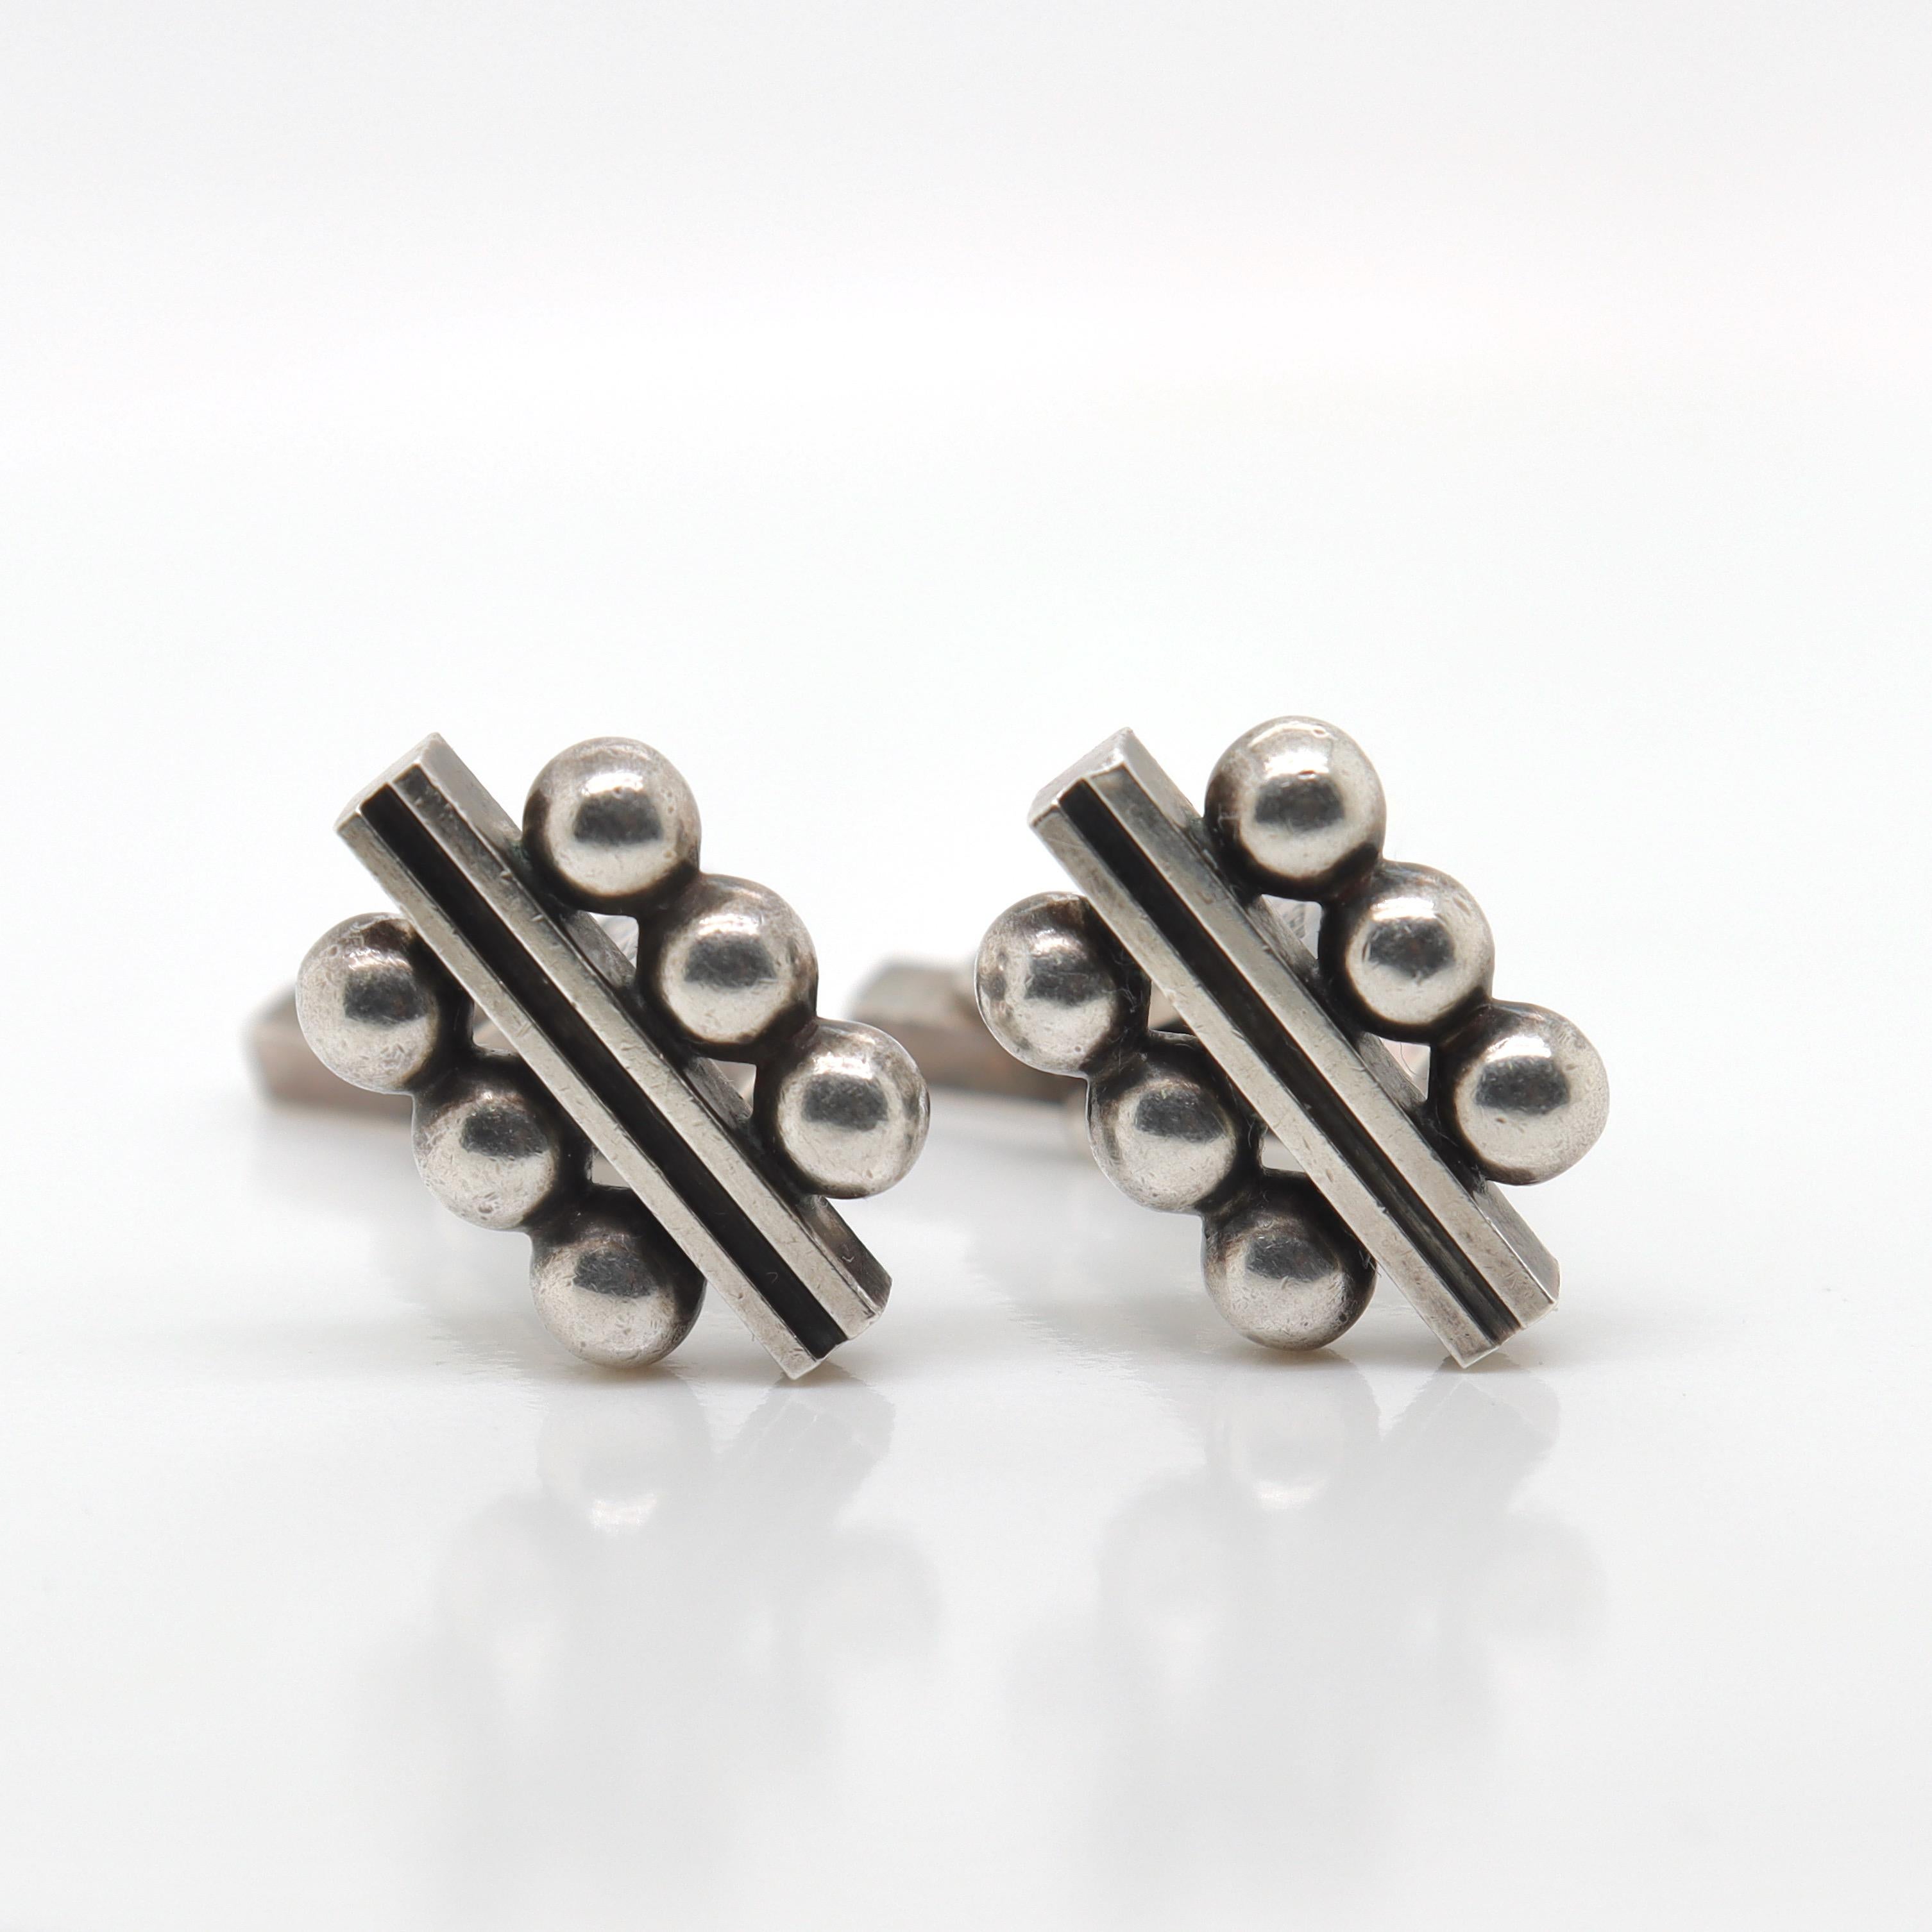 A fine pair of Georg Jensen sterling silver cufflinks

Model no. 61B

Designed by Harold Nielsen for Georg Jensen

Simply a wonderful pair of cufflinks from one of Denmark's premier silversmiths!

Date:
20th Century, post-1945

Overall